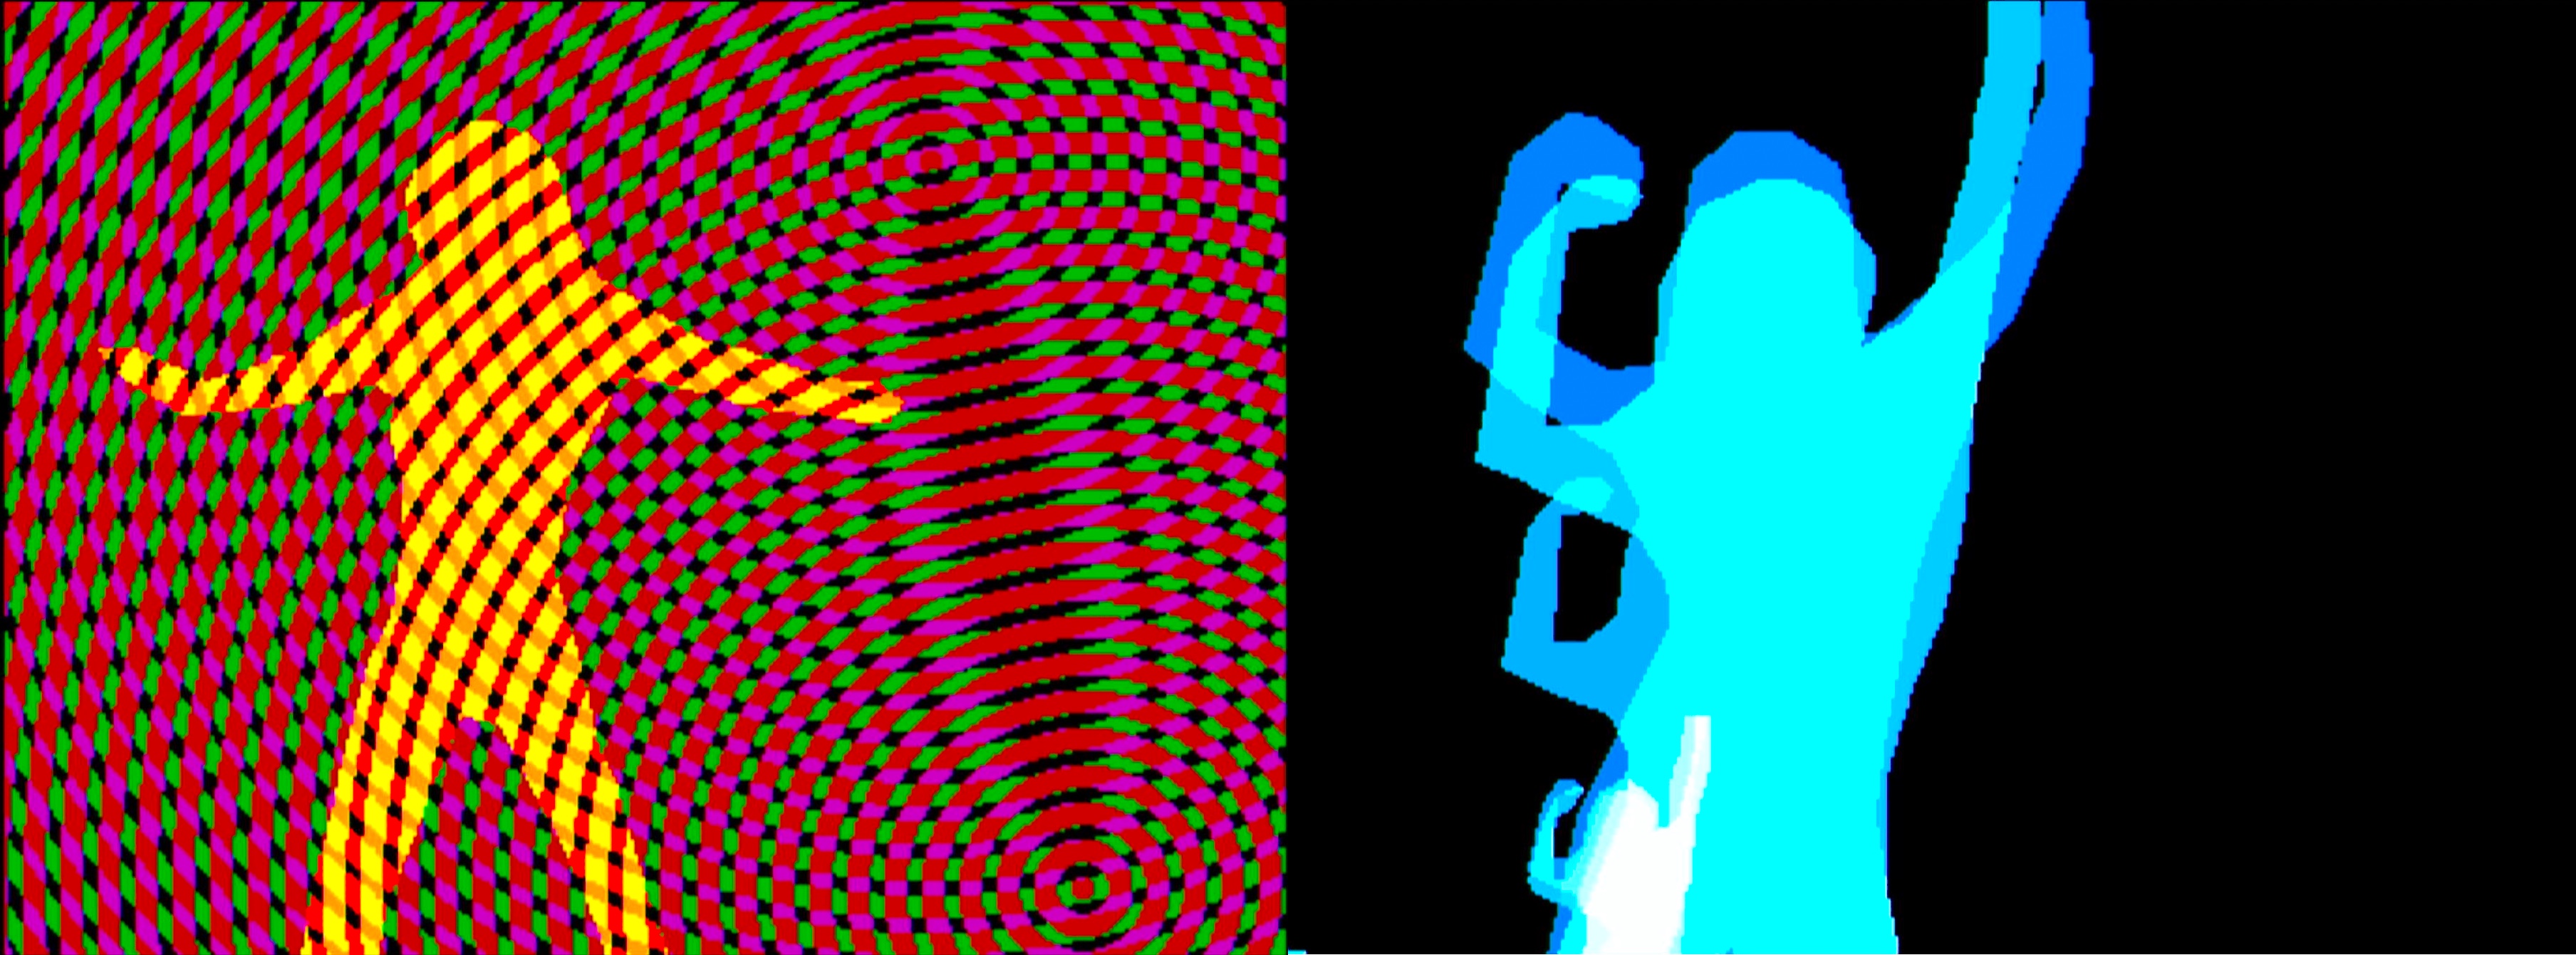 Two screenshots from the demo State of the Art by Spaceballs. 
                Both images show a silhoutted dancing figure on a multi-colored background.